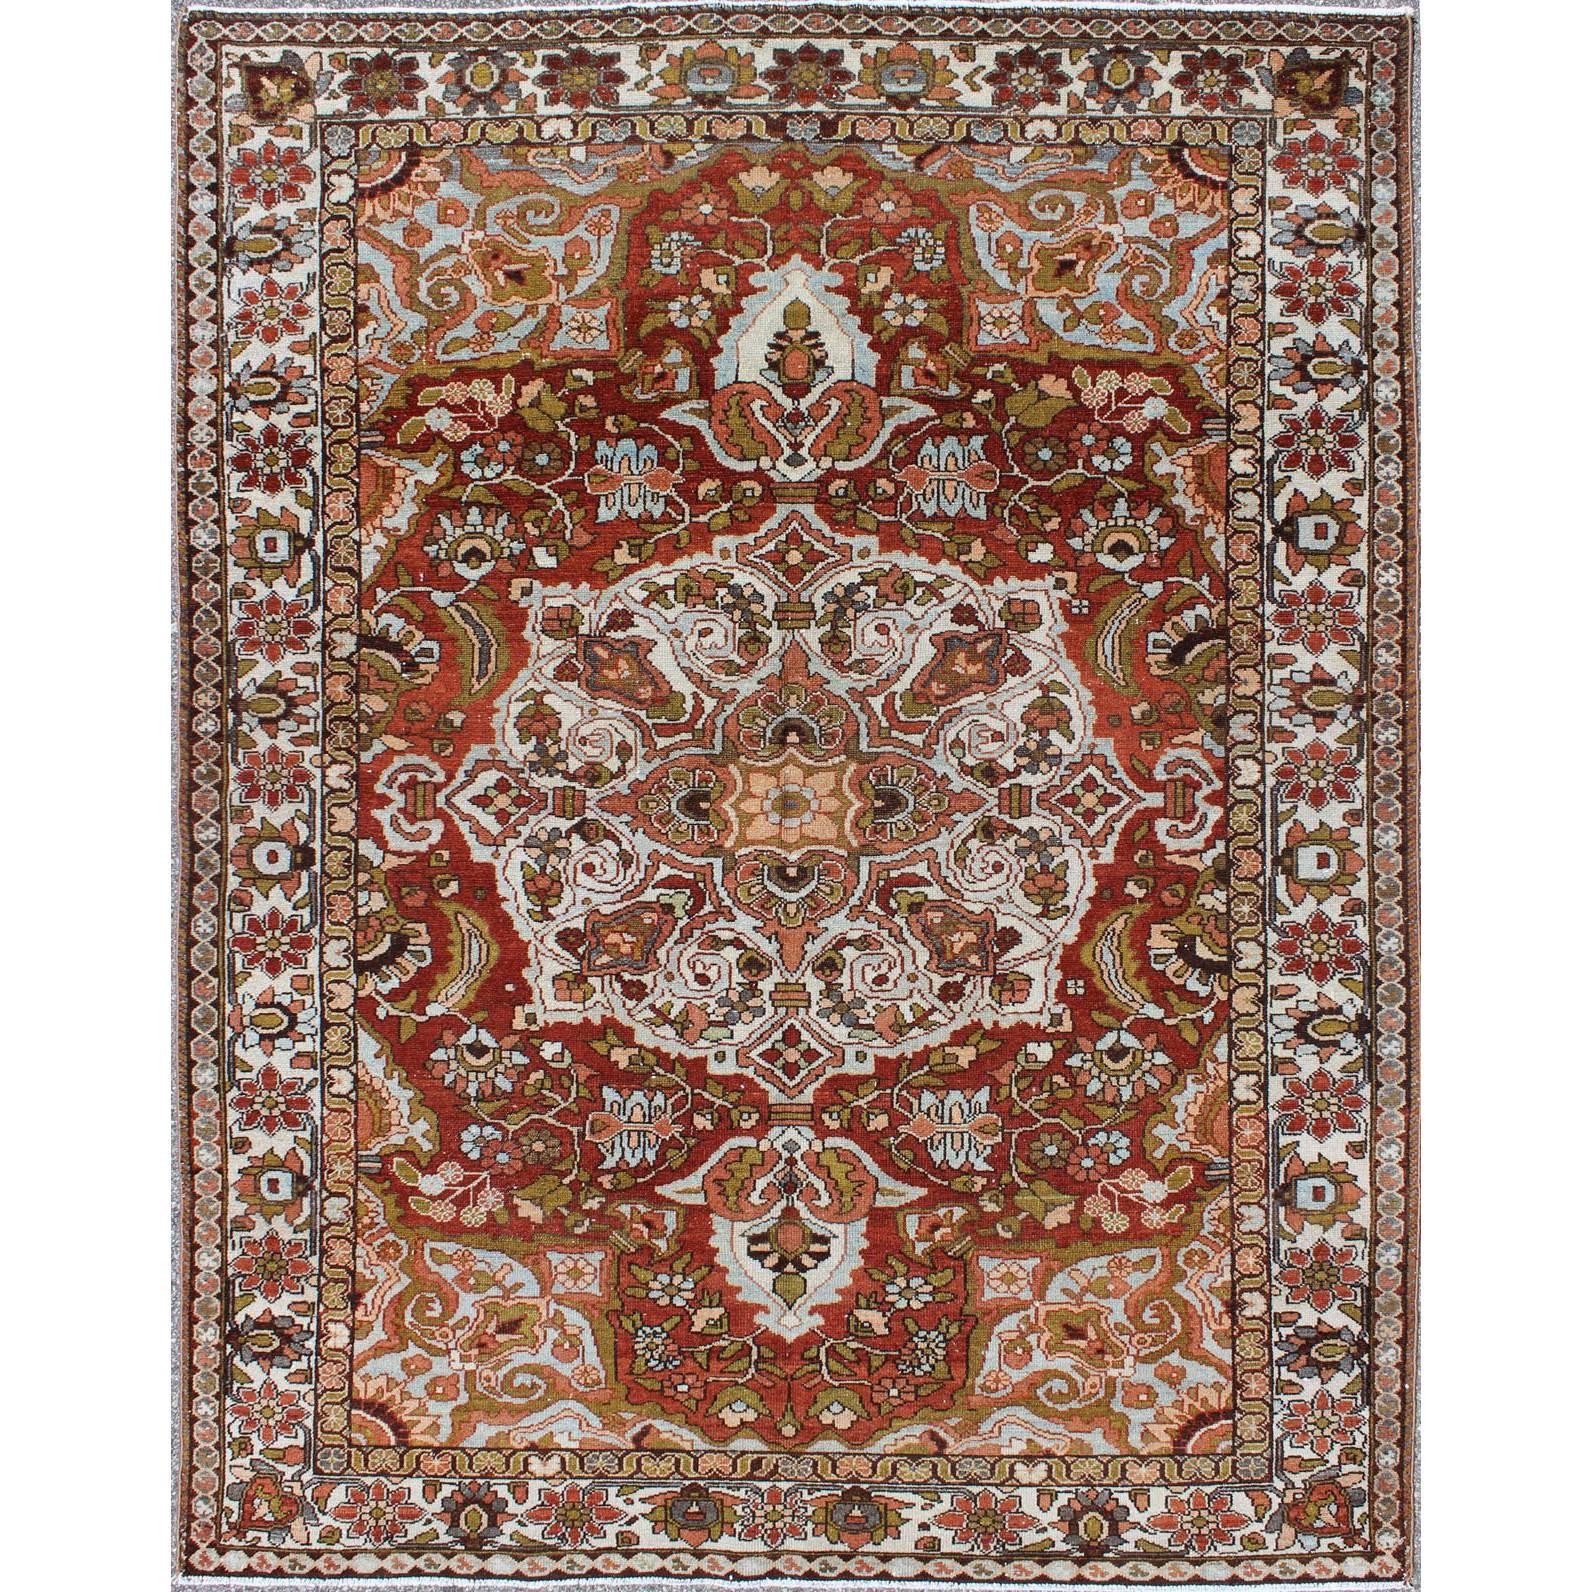 Antique Persian Bakhtiari Rug With Classic Ornate Central Medallion Design For Sale